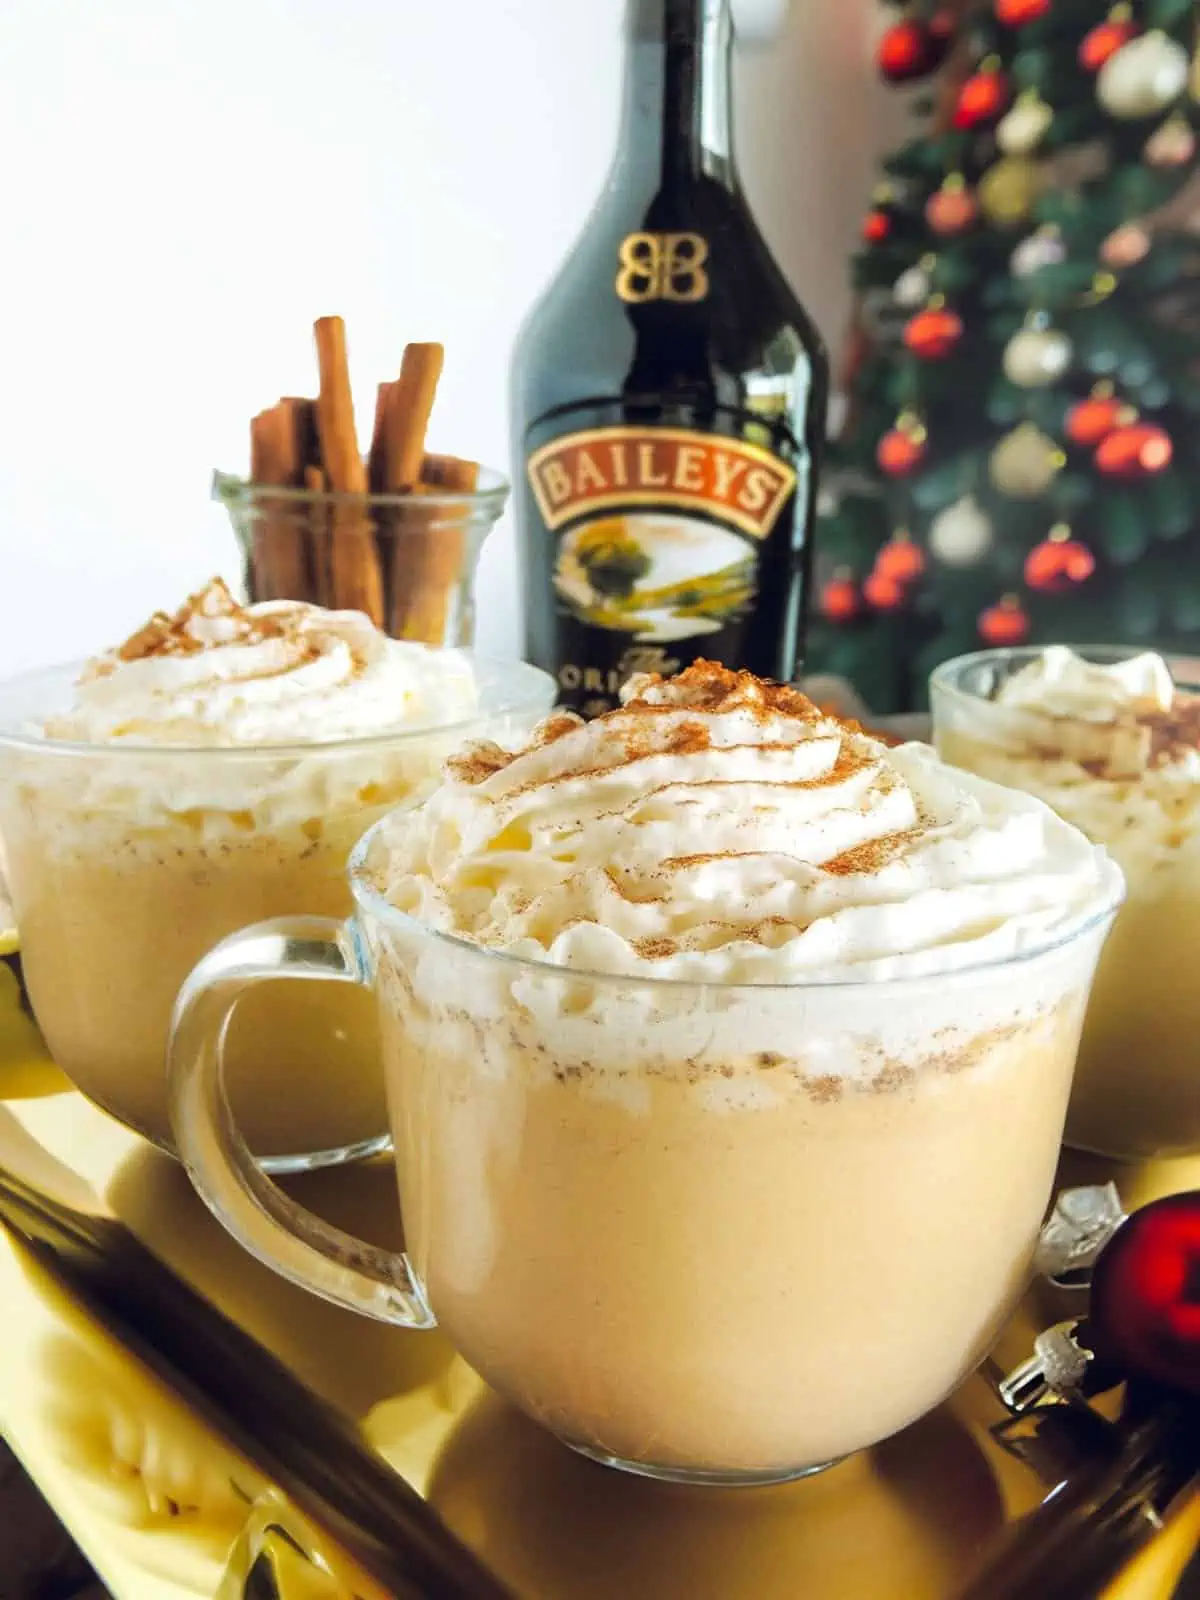 Baileys Eggnog made in three glasses on a gold tray. There is a christmas tree on the right in the background, with the bottle of baileys in the center and some cinnamon sticks on the left.